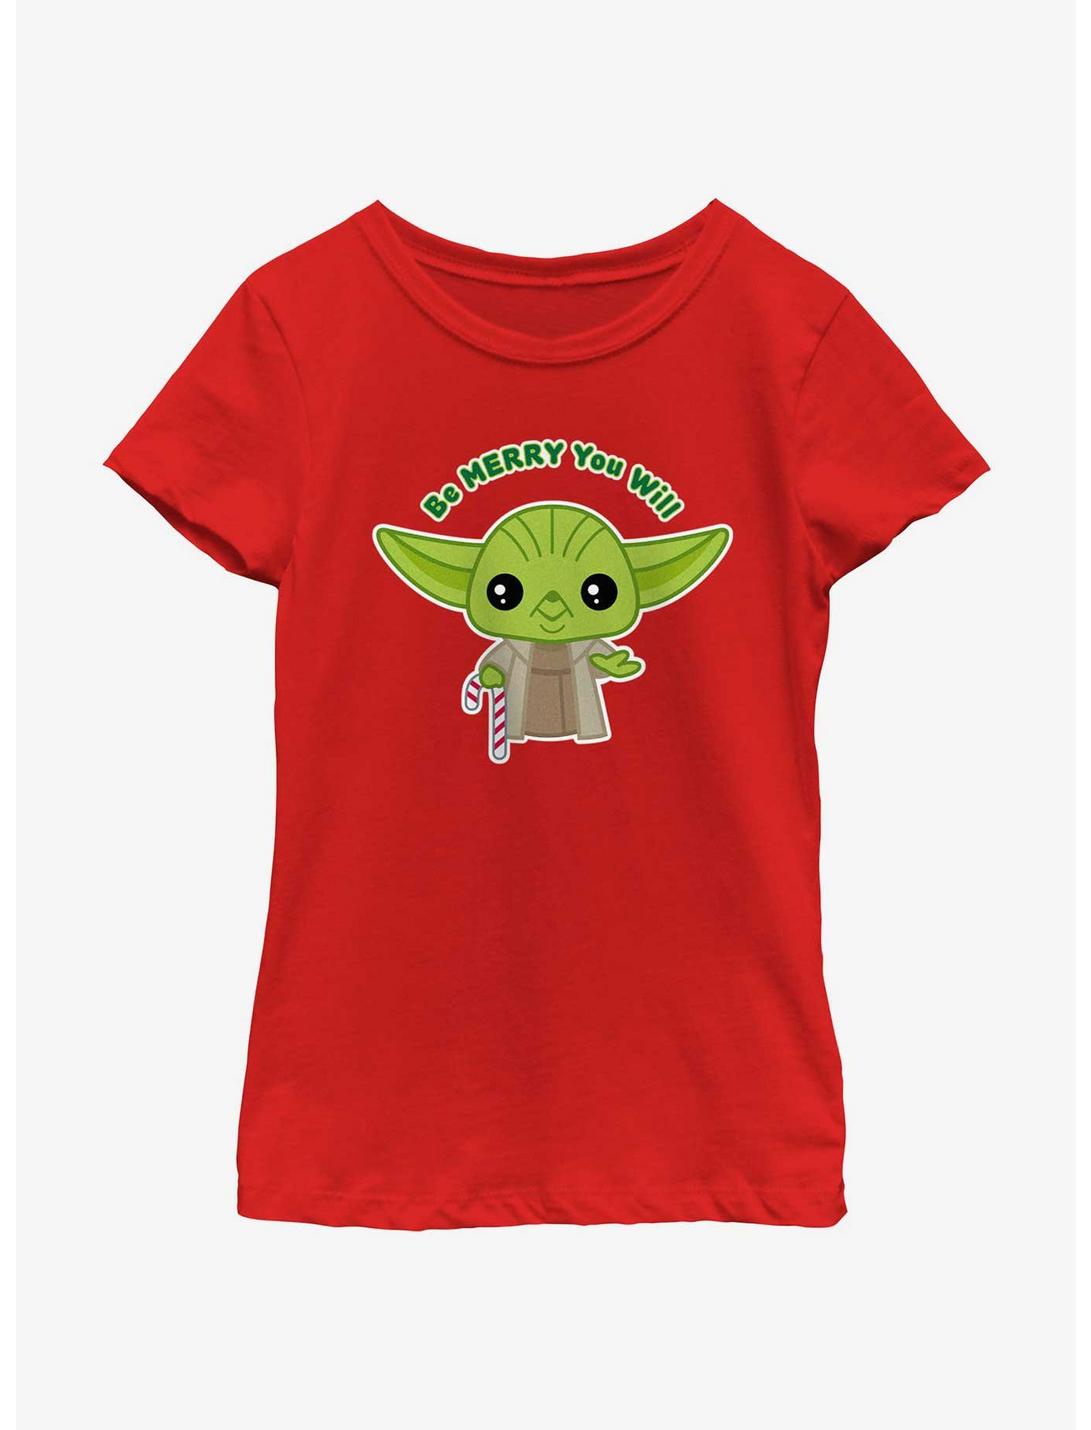 Star Wars Yoda Be Merry You Will Youth Girls T-Shirt, RED, hi-res